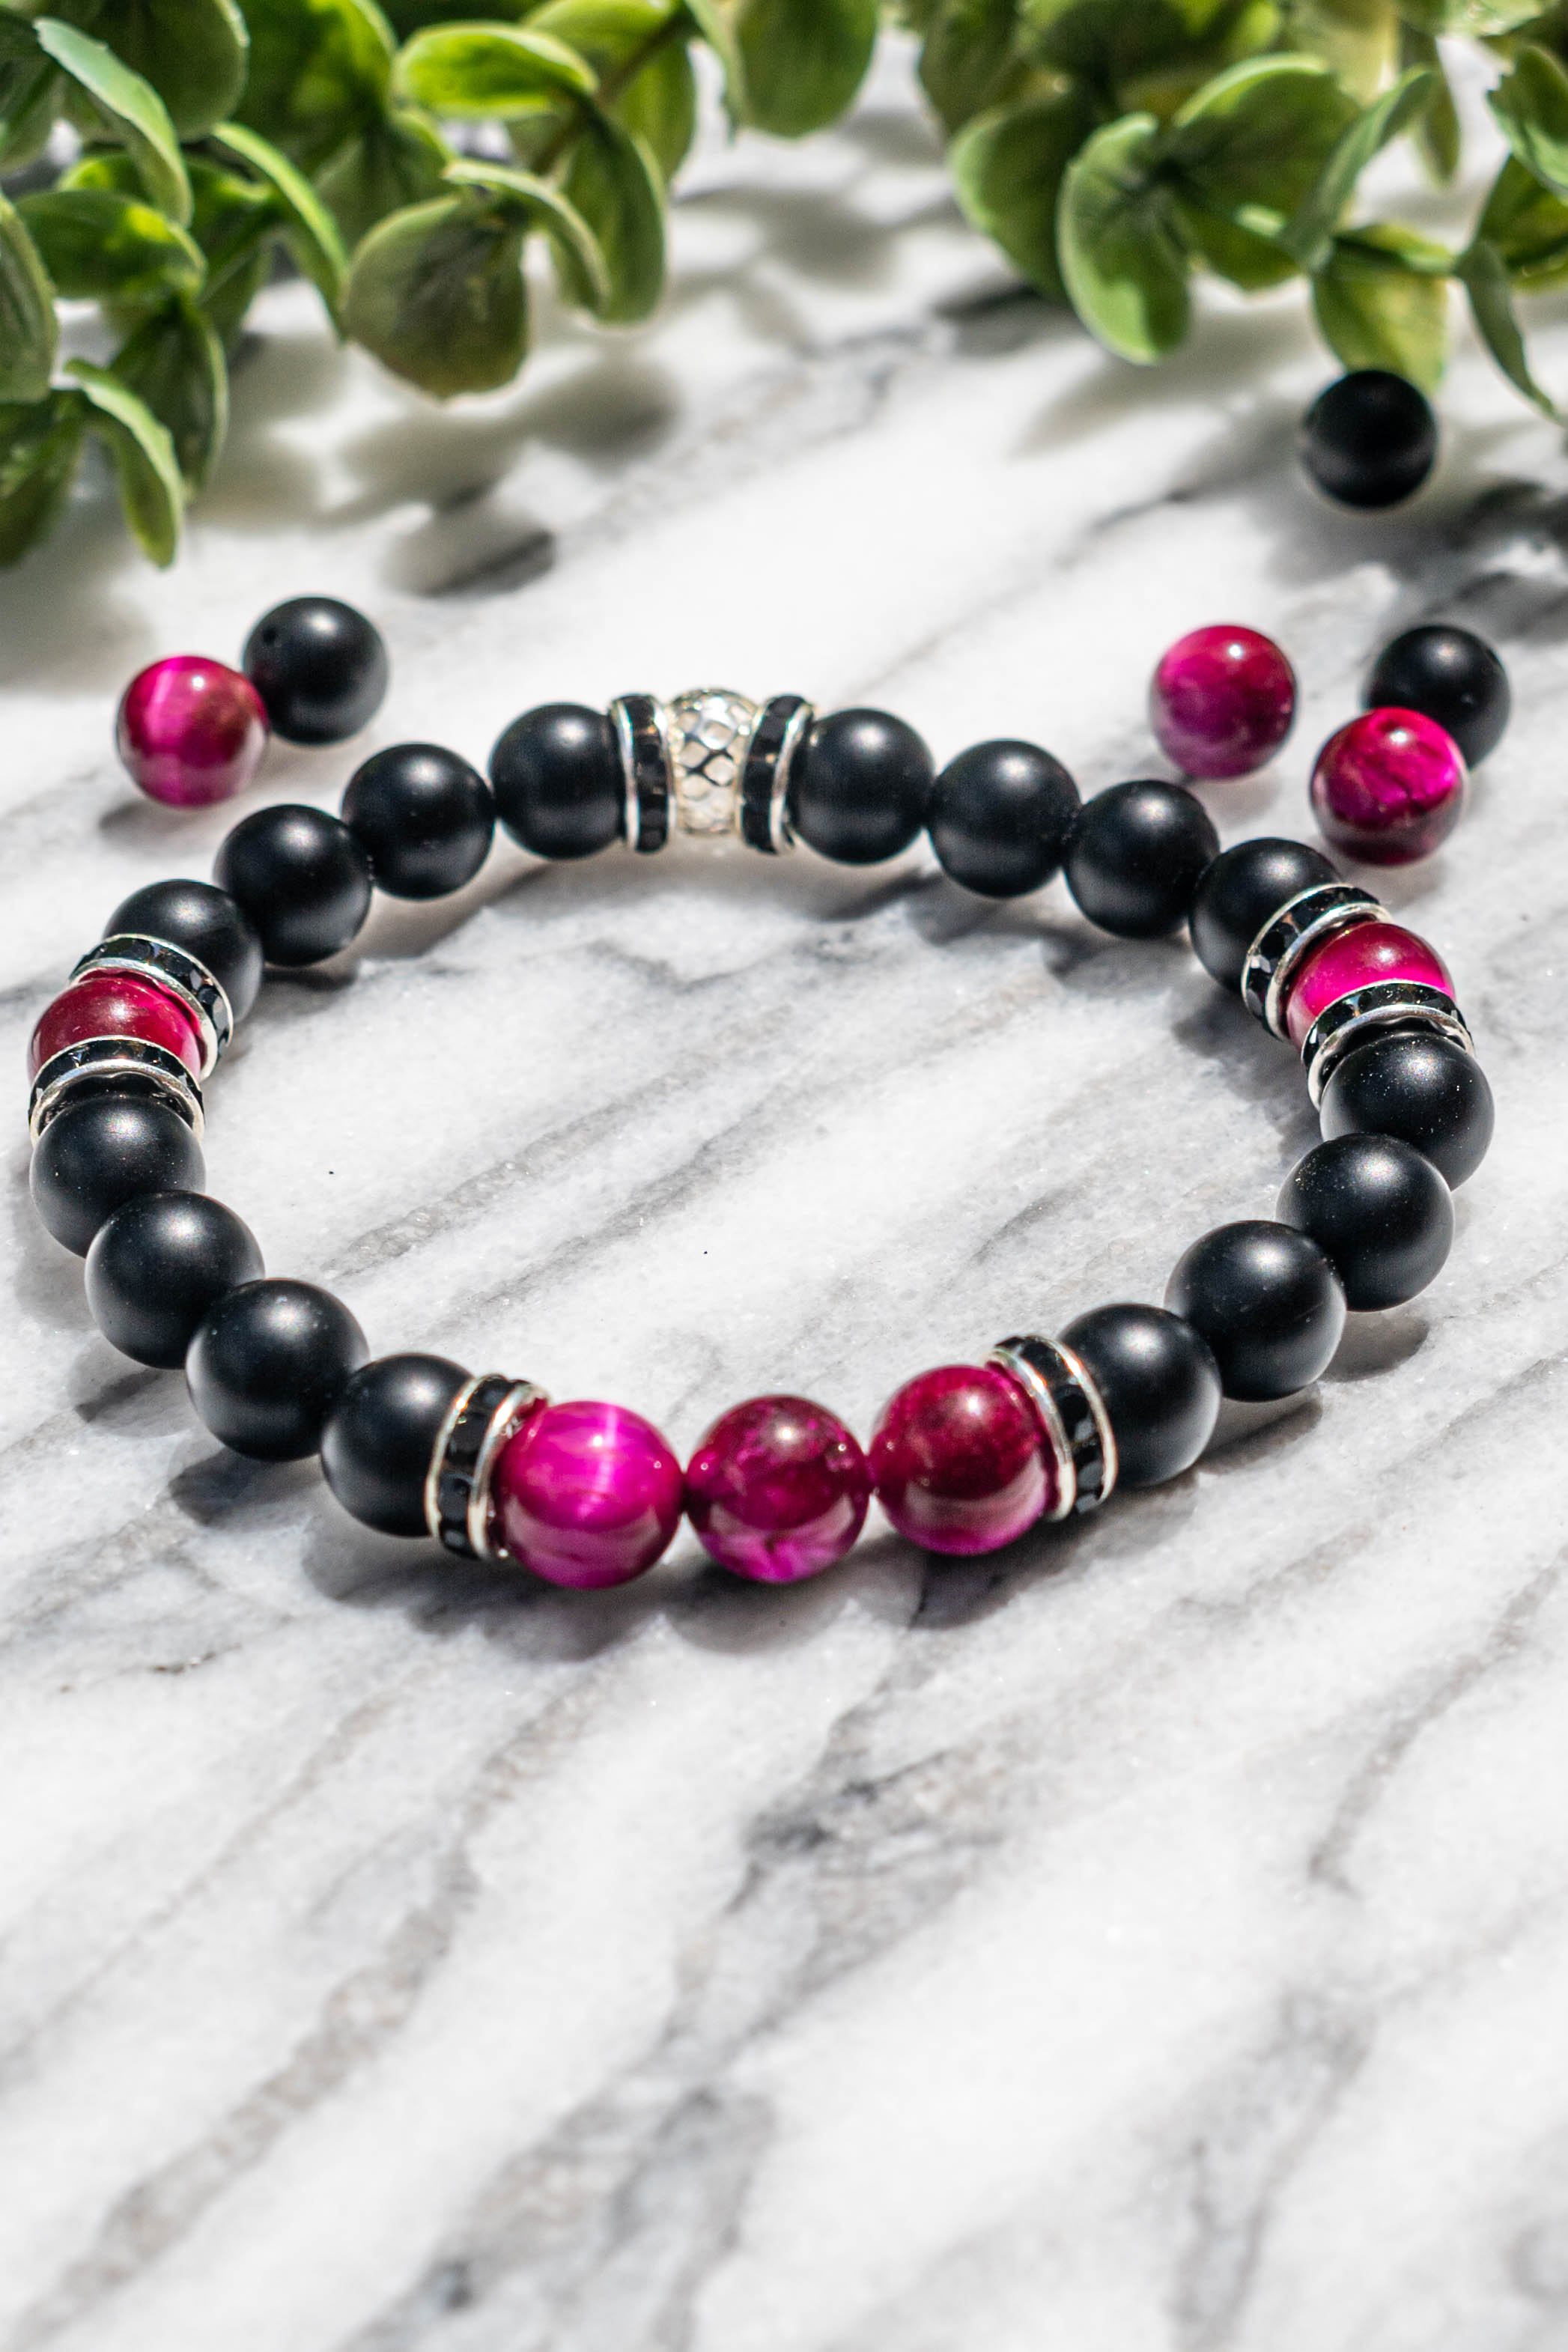 Hot Pink Silicone Bead Bracelet Black Shamballa Gold or Silver Spacers  Womens Ladies Bracelet - Etsy